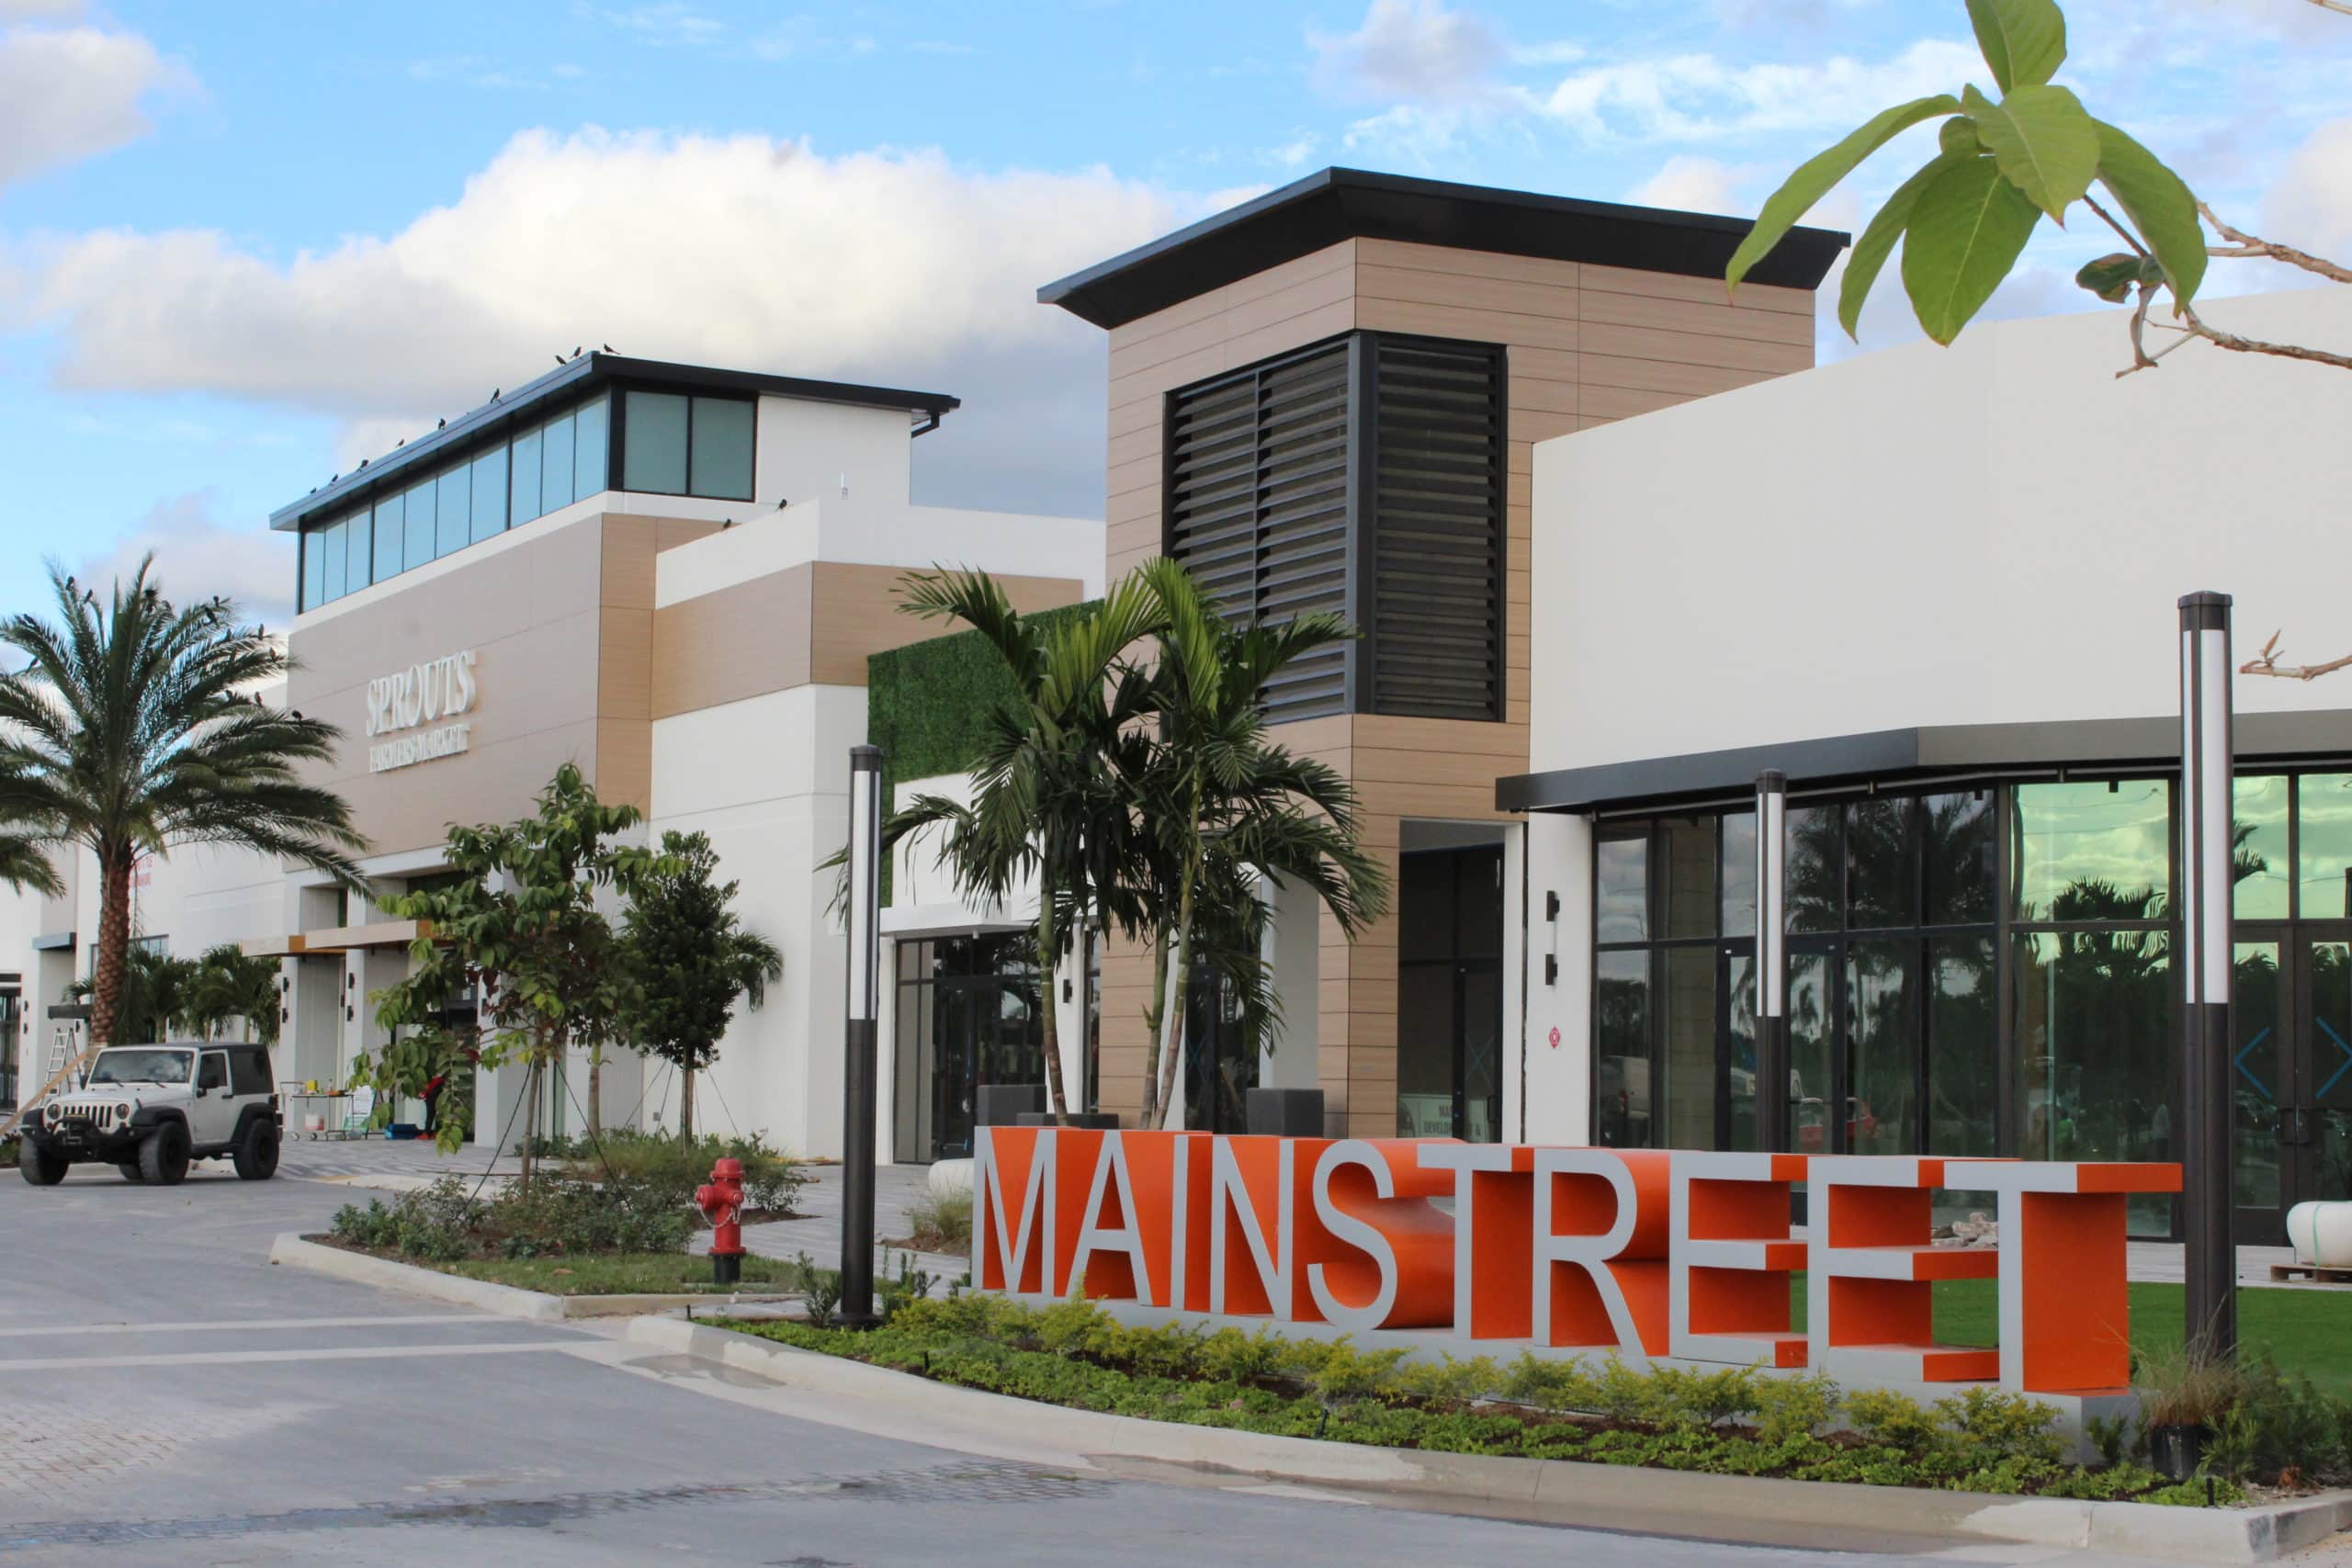 Rainscreen Façade from Fundermax with Exterior Soffits for the Mainstreet Shopping Center.